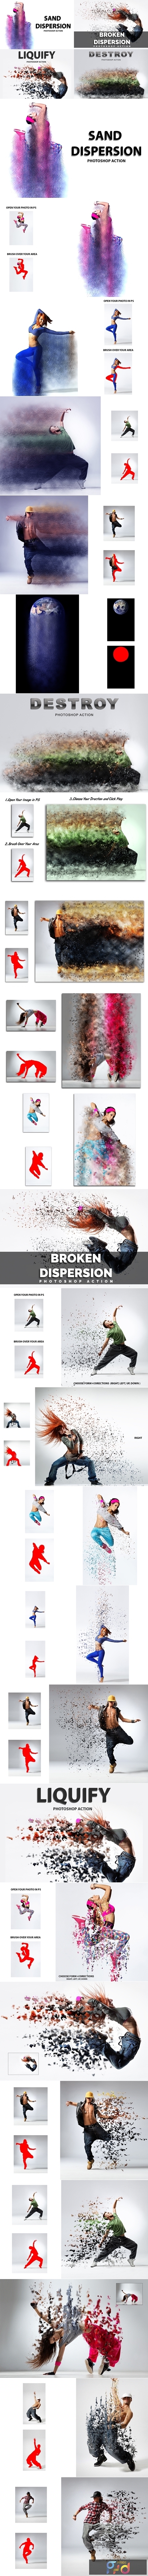 in 1 Dispersion Photoshop Actions